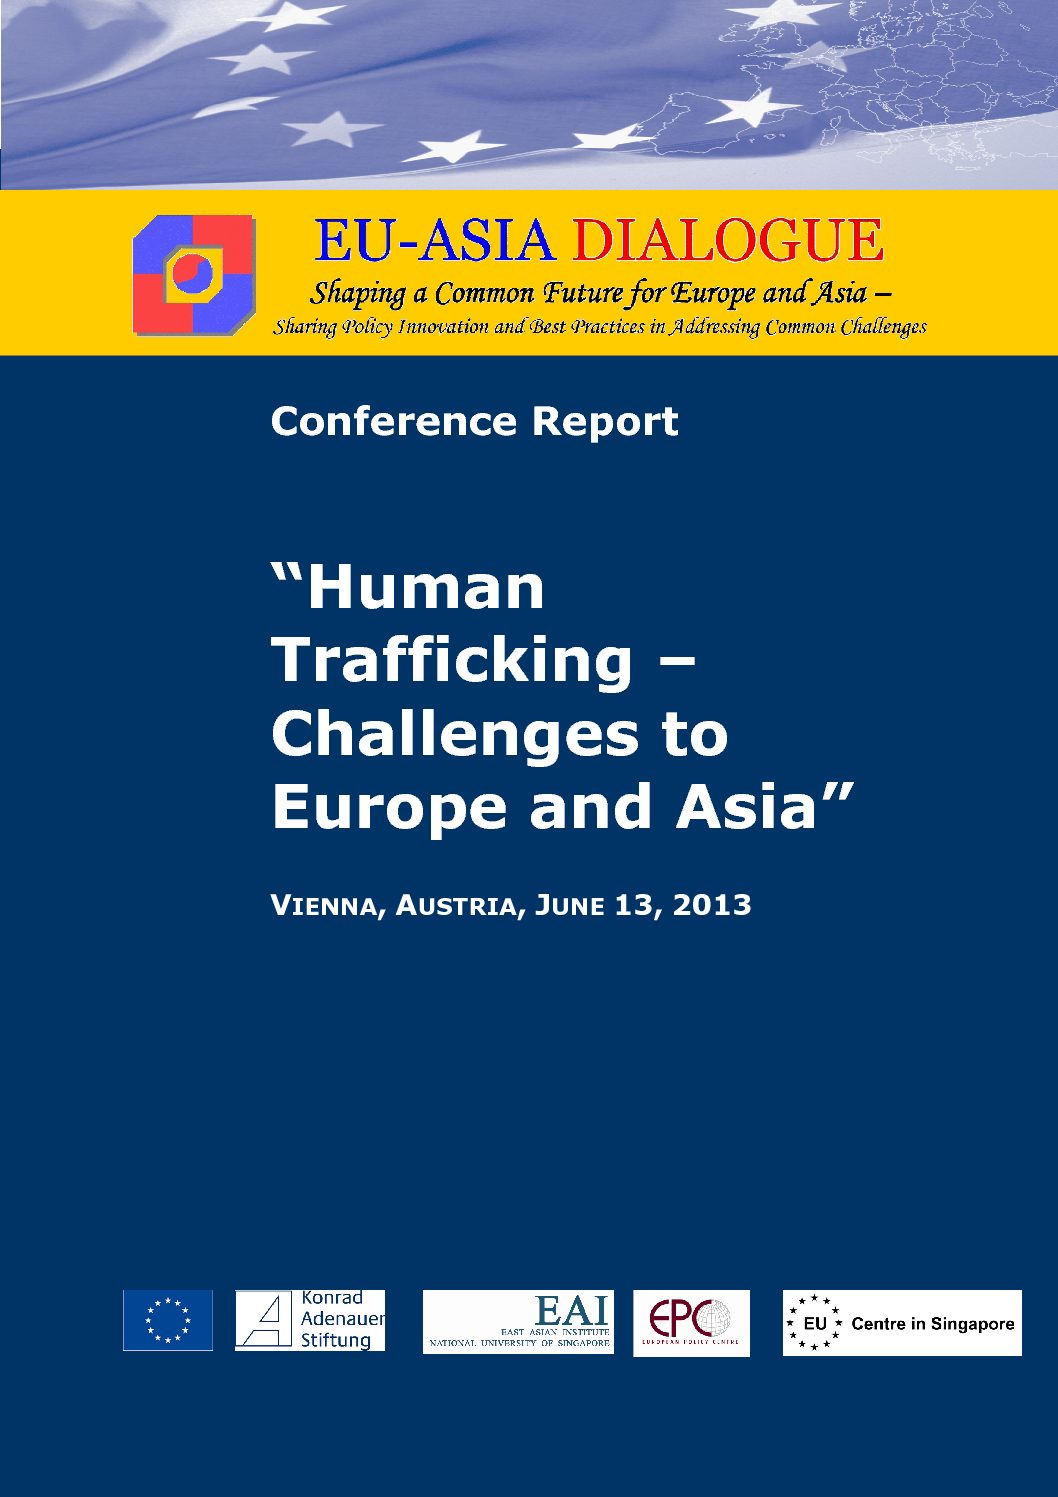 Human Trafficking – Challenges to Europe and Asia